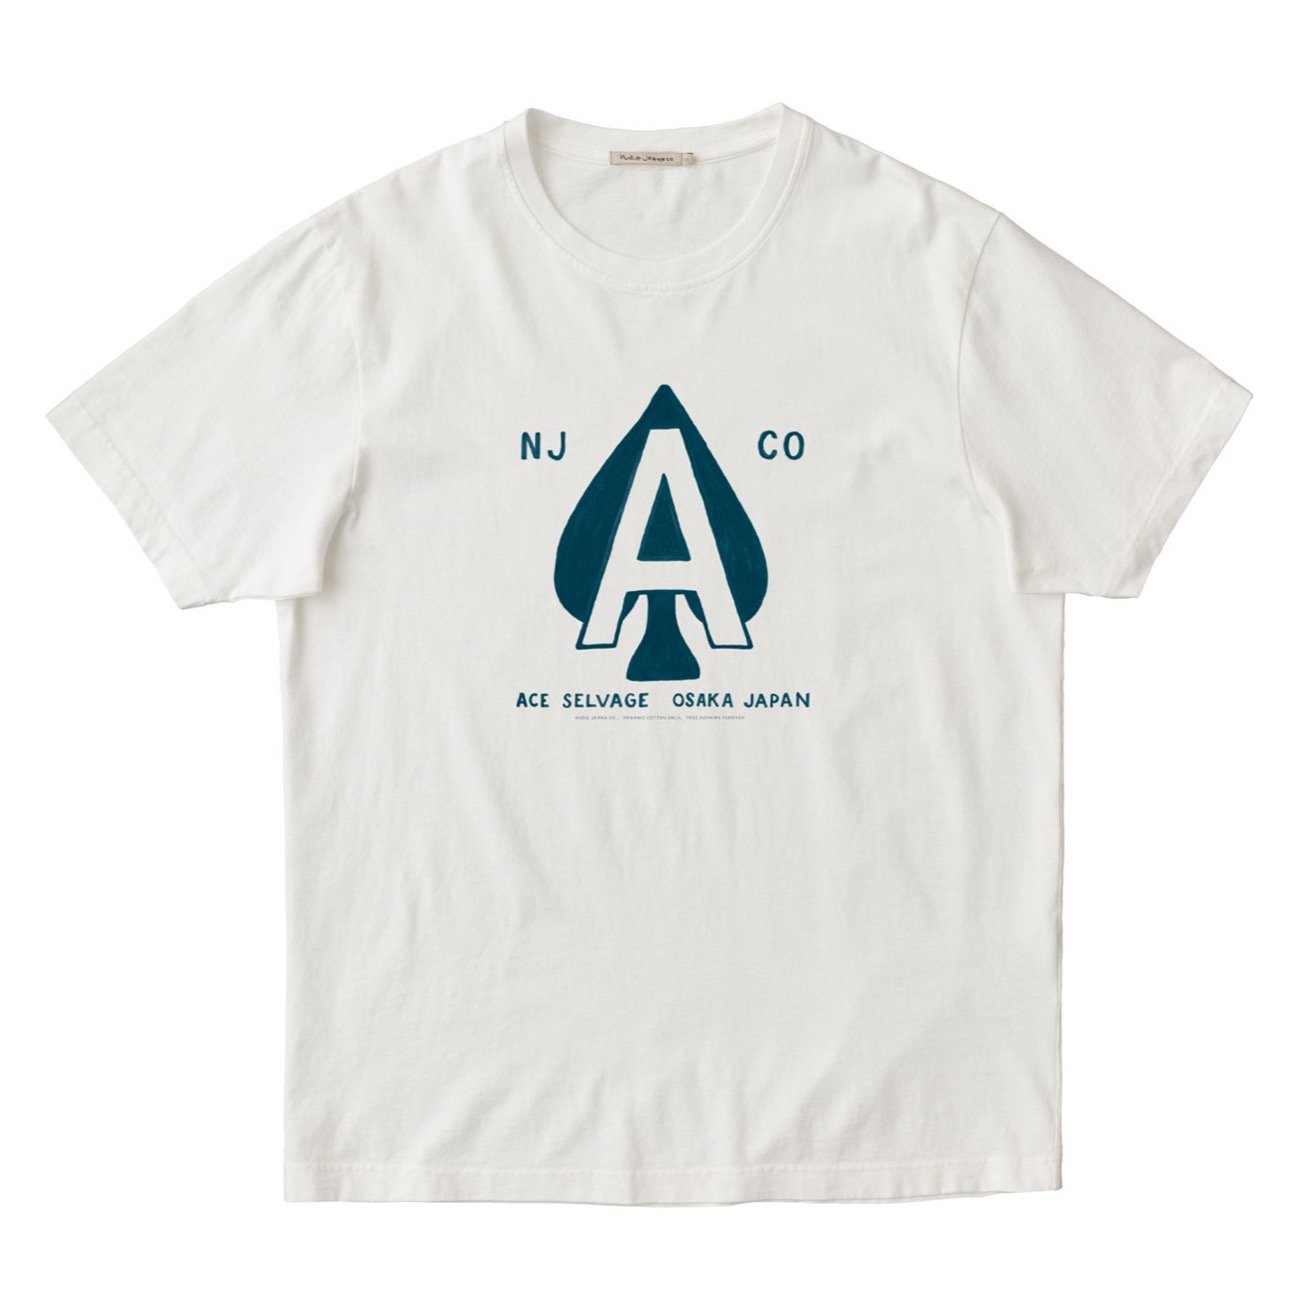 Nudie Jeans Co. Uno Ace T-Shirt